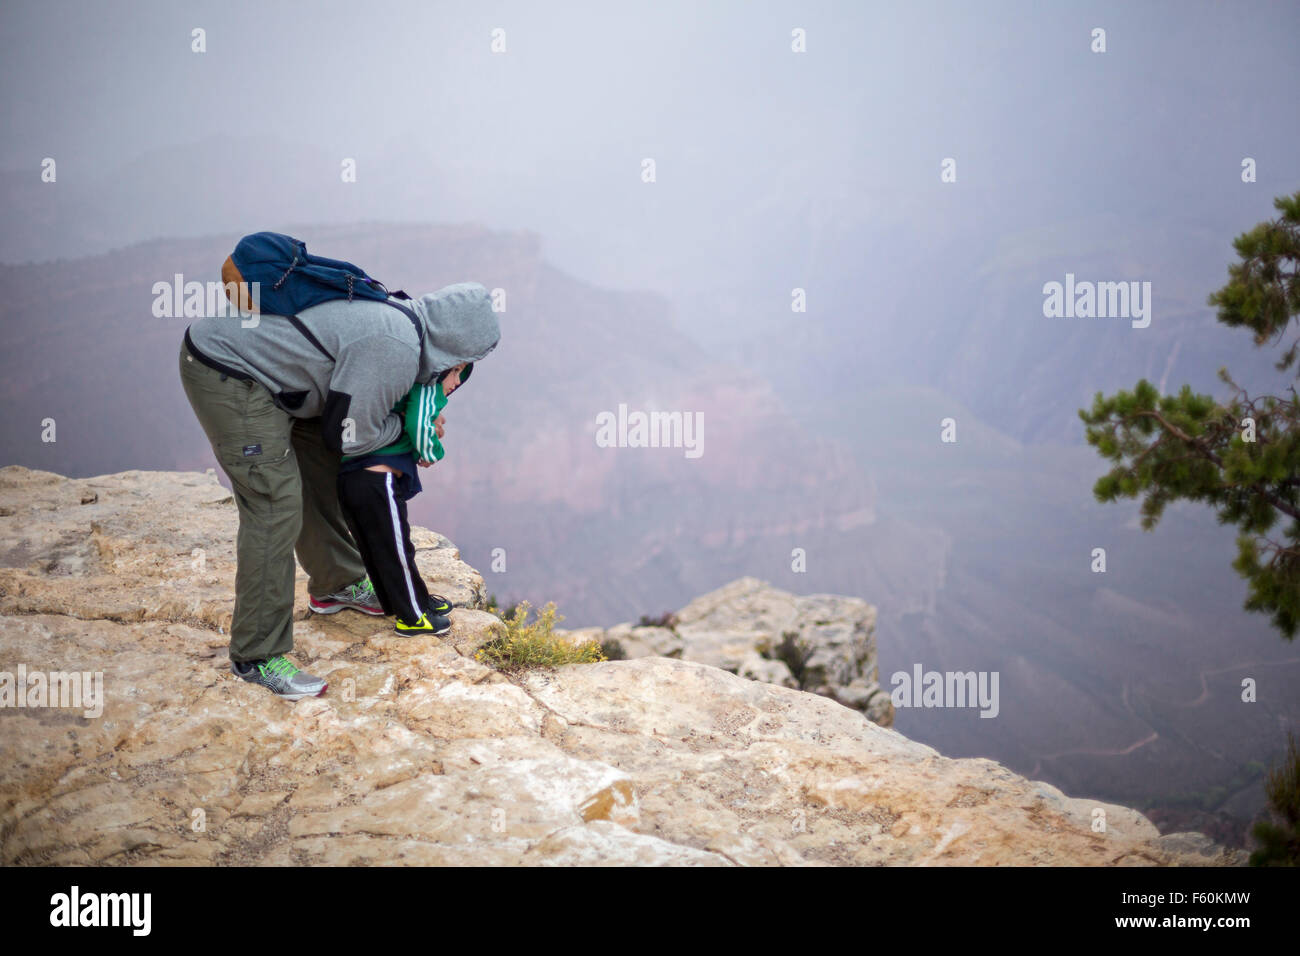 Grand Canyon National Park, Arizona - A man holds a boy as they peer over the edge of the south rim of the Grand Canyon. Stock Photo